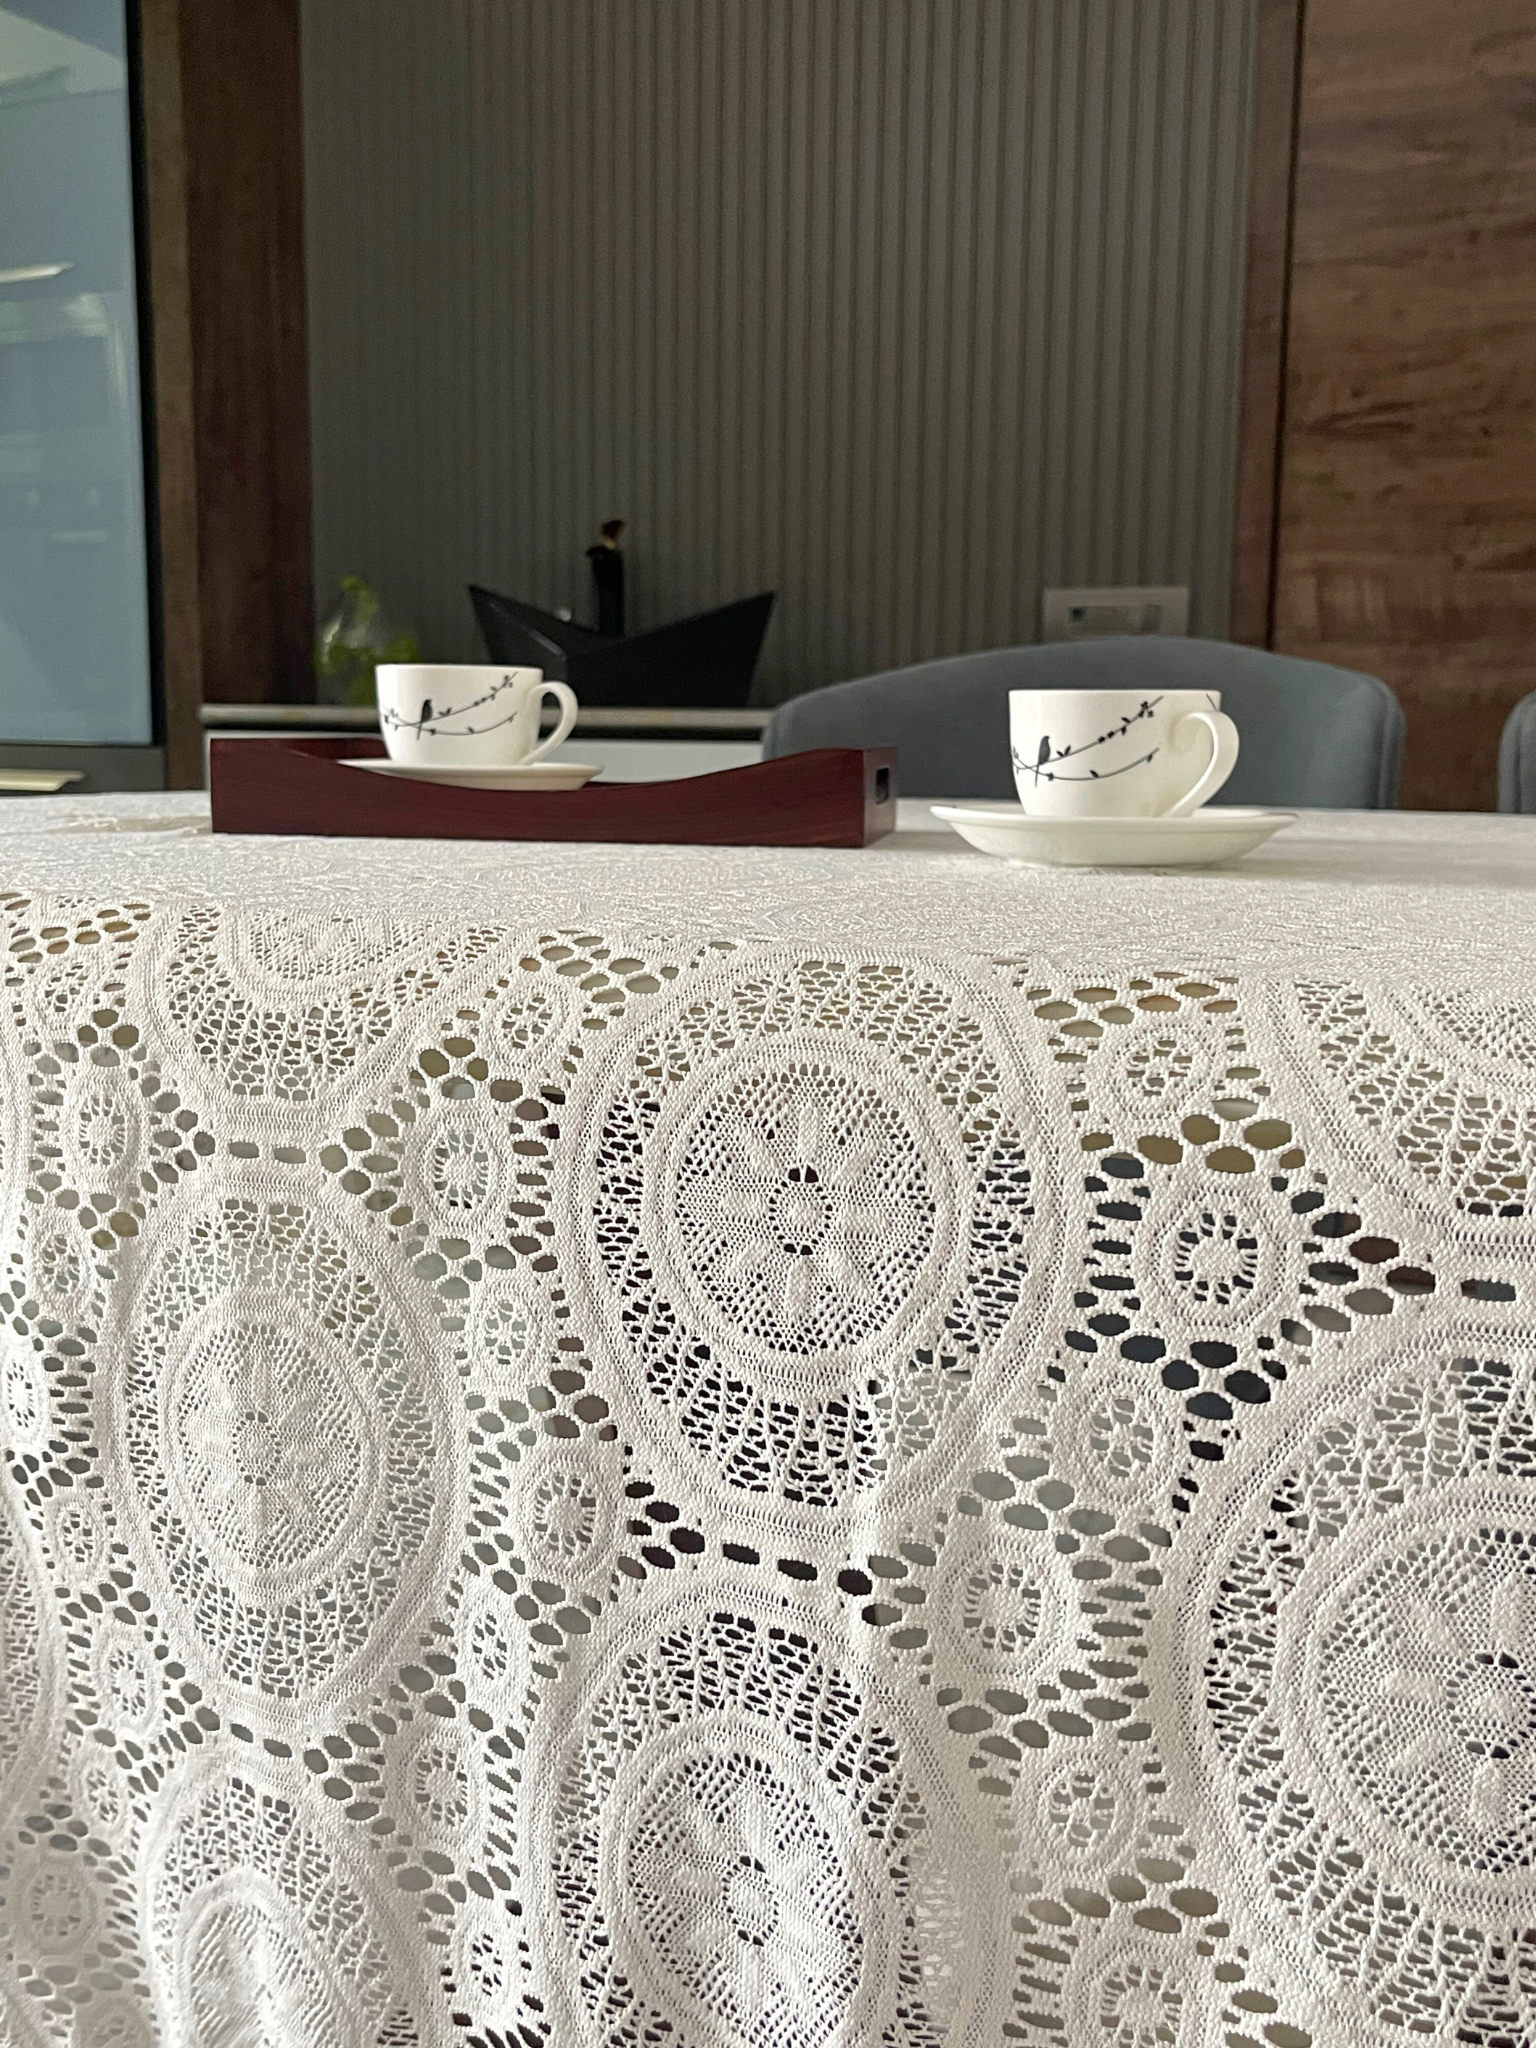 high-tea-party-table cover -for-dining-table-white net